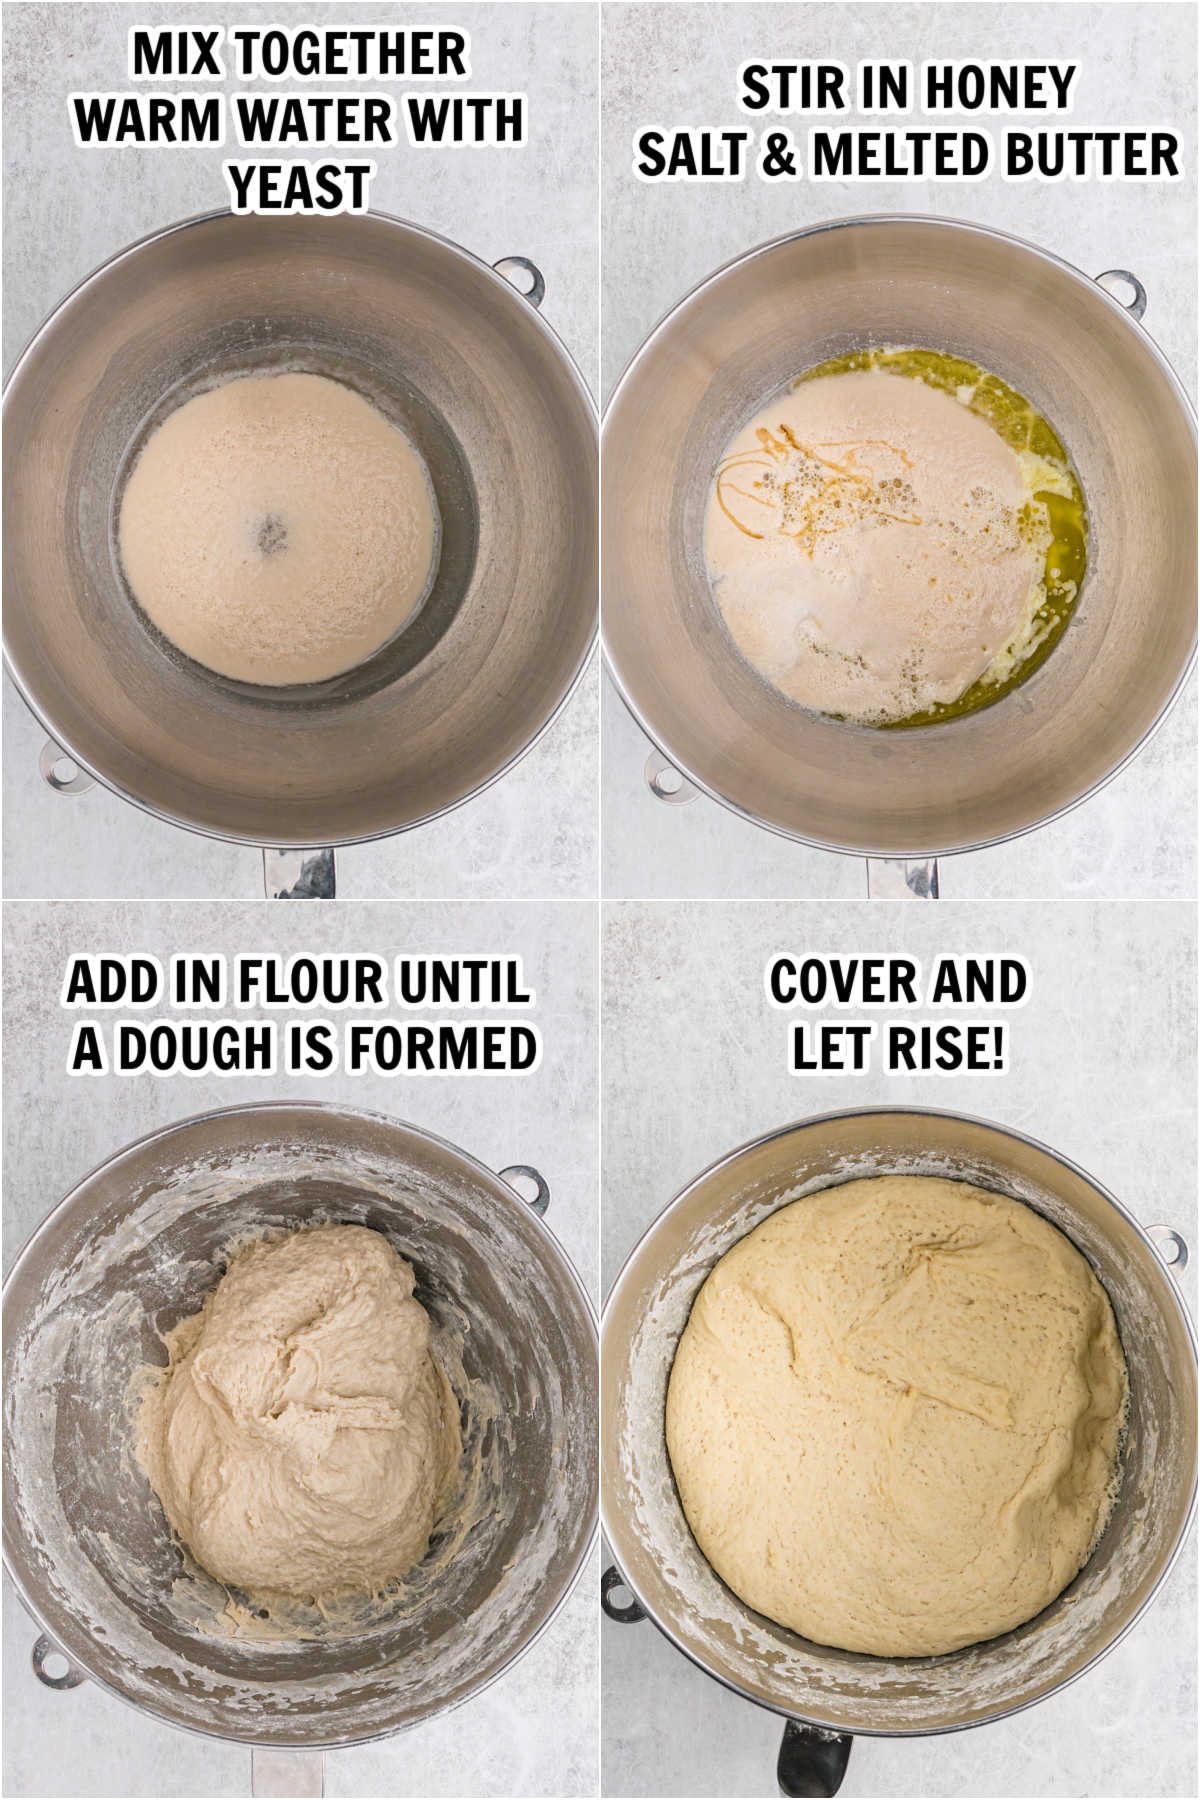 The process of making the dough